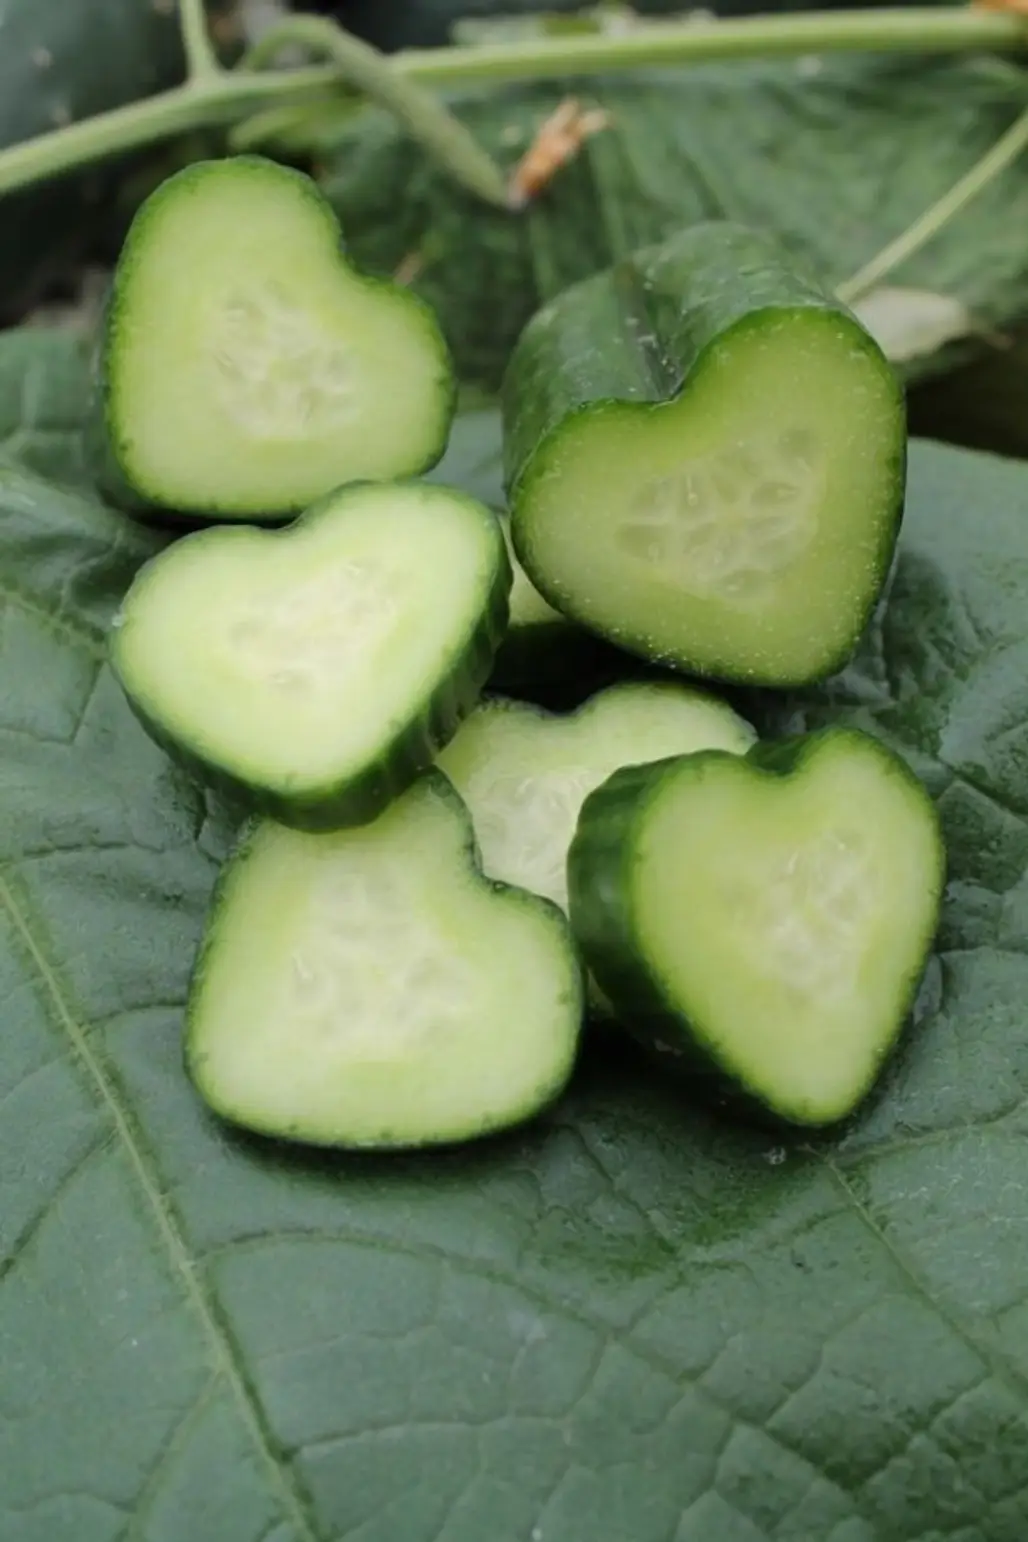 Heart-Shaped Fruit and Vegetables